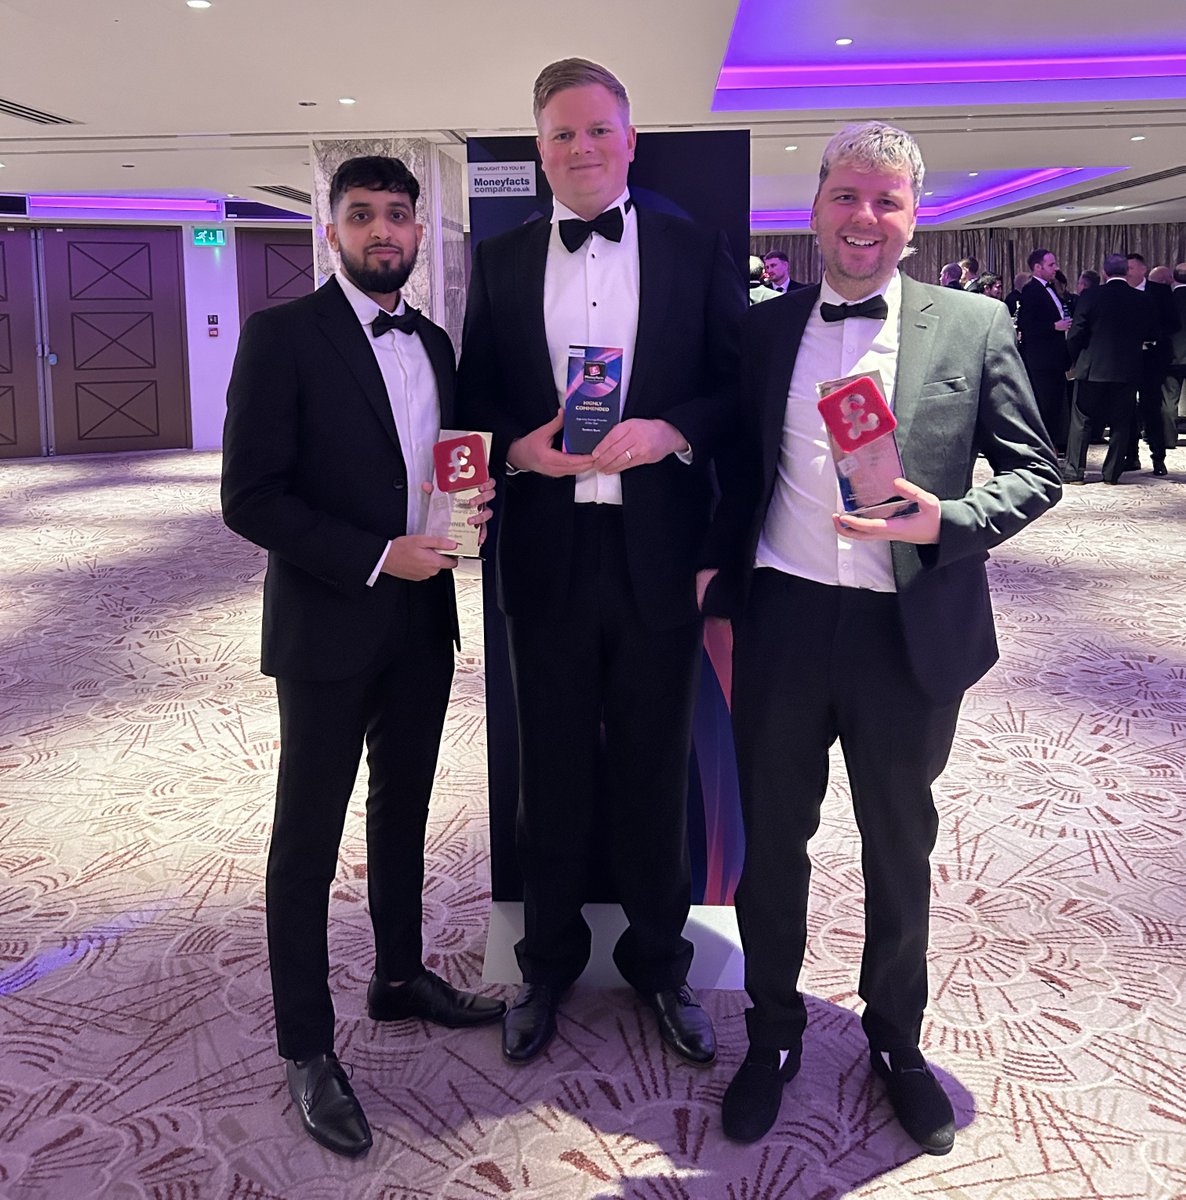 Whoop! We bagged a hat trick at last night’s @Moneyfacts awards! 🏆 Green Savings Product of the Year - Winner 🏆 Fixed Rate Savings Provider of the Year - Winner 🏆App-only Savings Provider of the Year – Highly Commended #SavingsApp #GreenSavings #WeAreTandem #MFCAwards